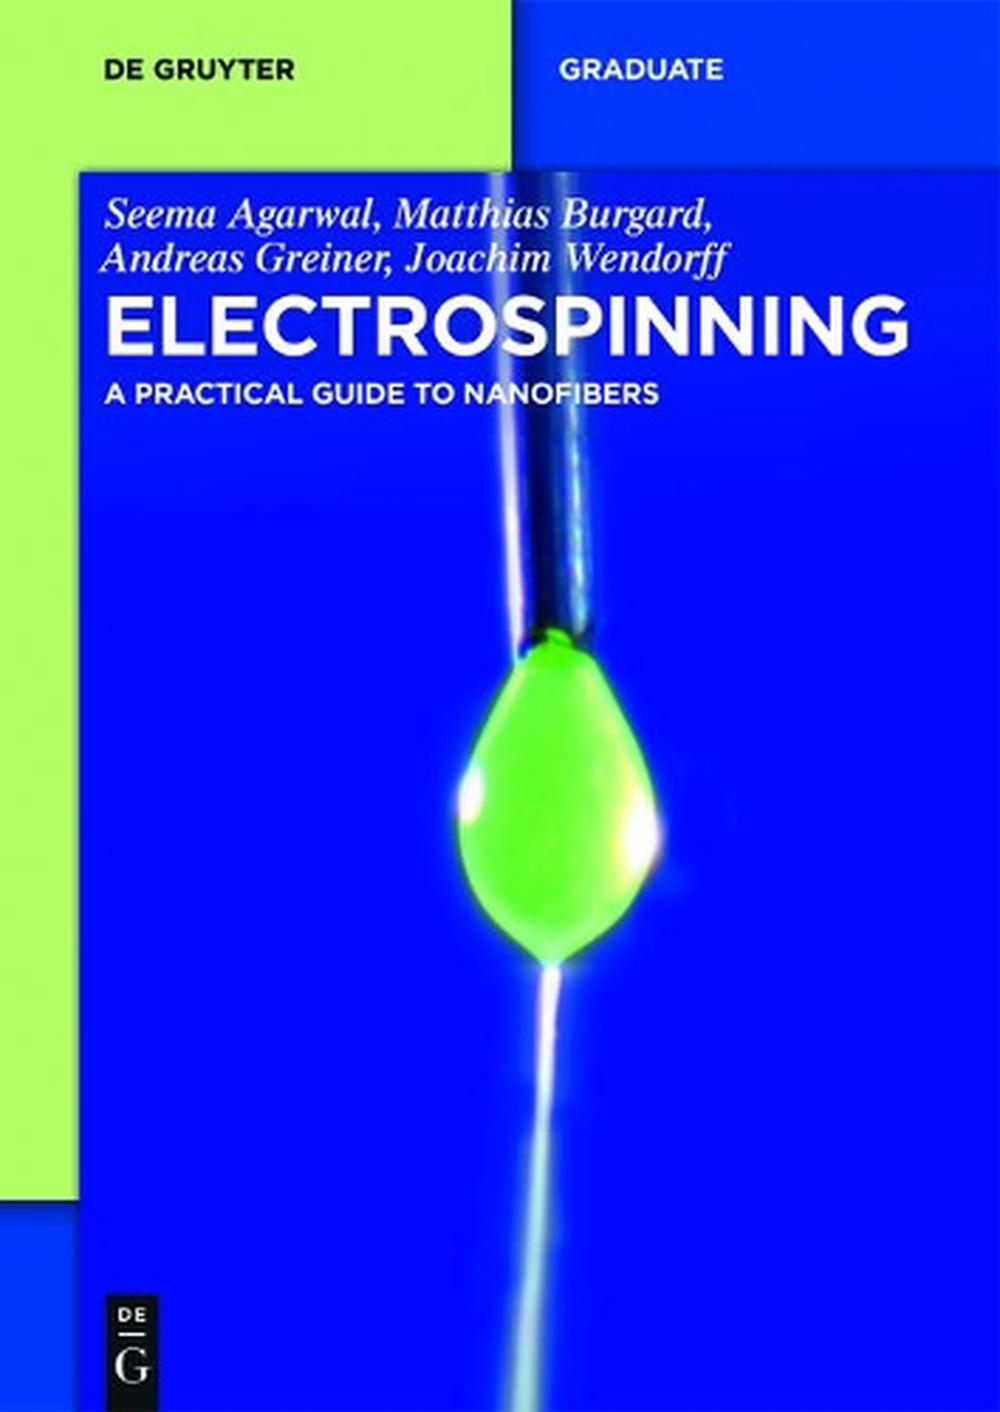 Electrospinning: A Practical Guide to Nanofibers by Seema Agarwal ...